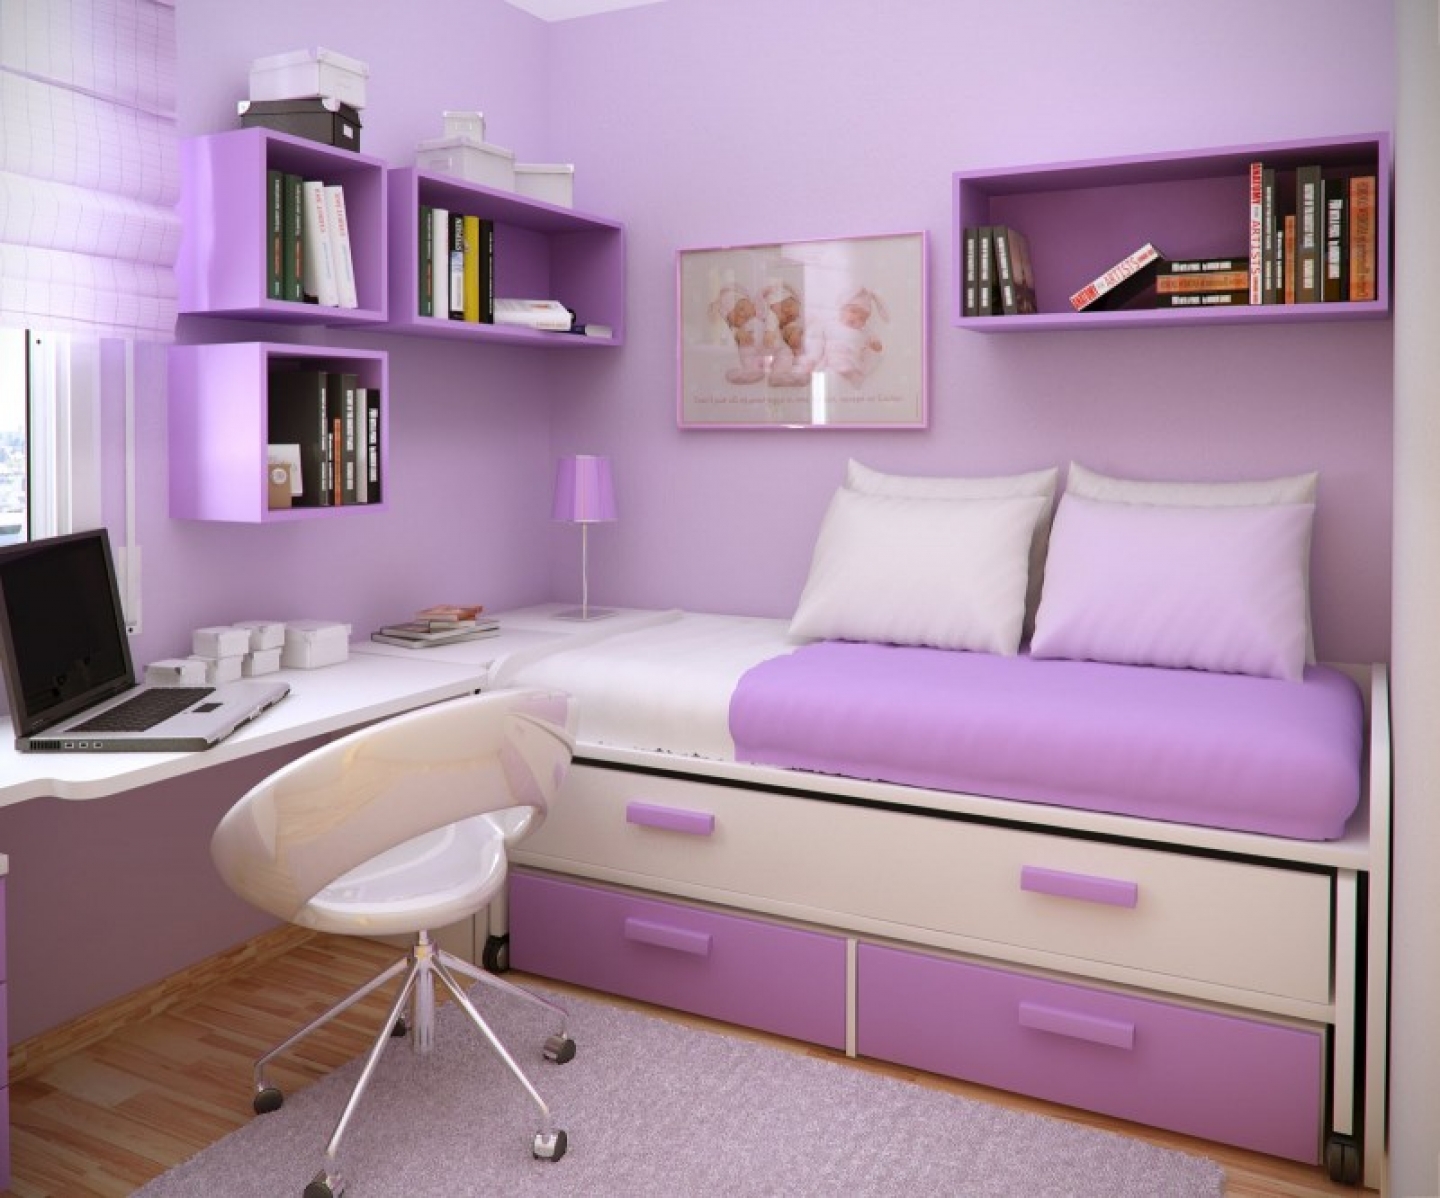 Wall Color Storage Alluring Wall Color And Cubicle Storage For Tiny Purple Teen Girl Room Ideas With Floating Desk Interior Design Beautiful Teen Girl Room Interior Design Embellished With Charming Wall Decor